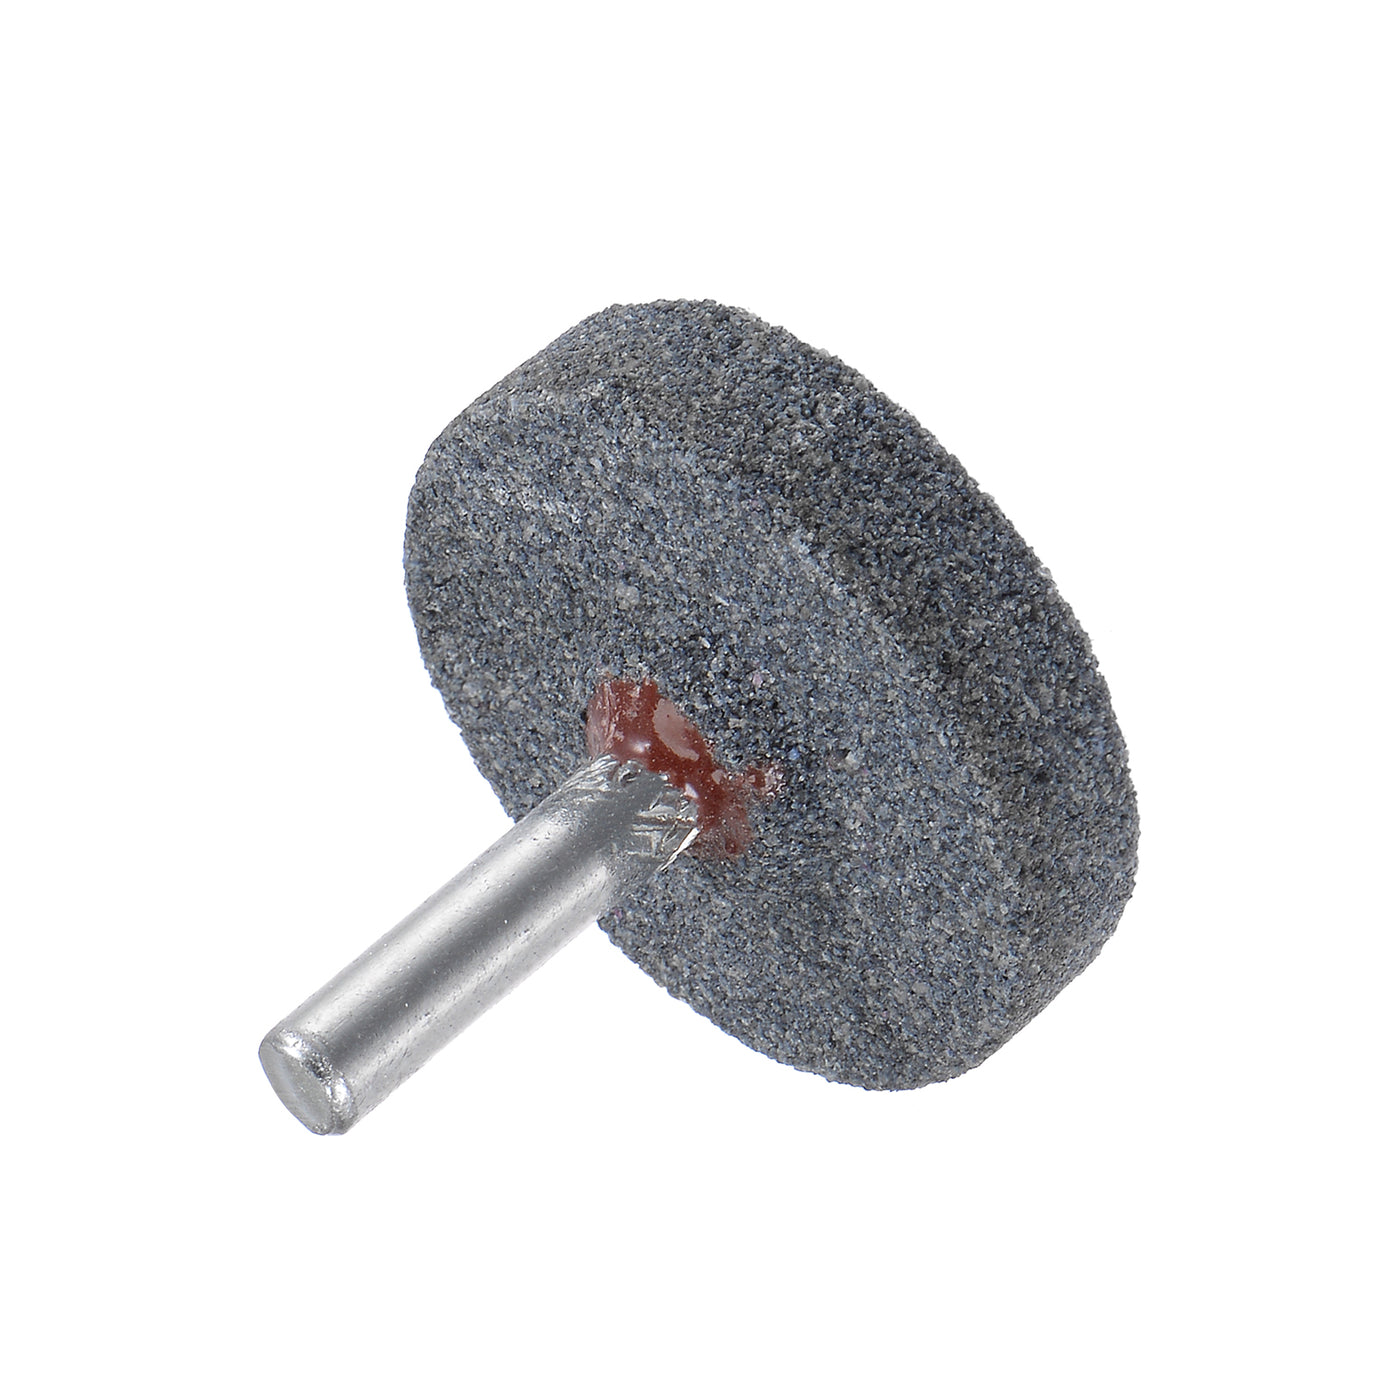 Uxcell Uxcell Mounted Grinding Stone 1/4" Shank 1.5-inch Dia Corundum Grinding Wheel